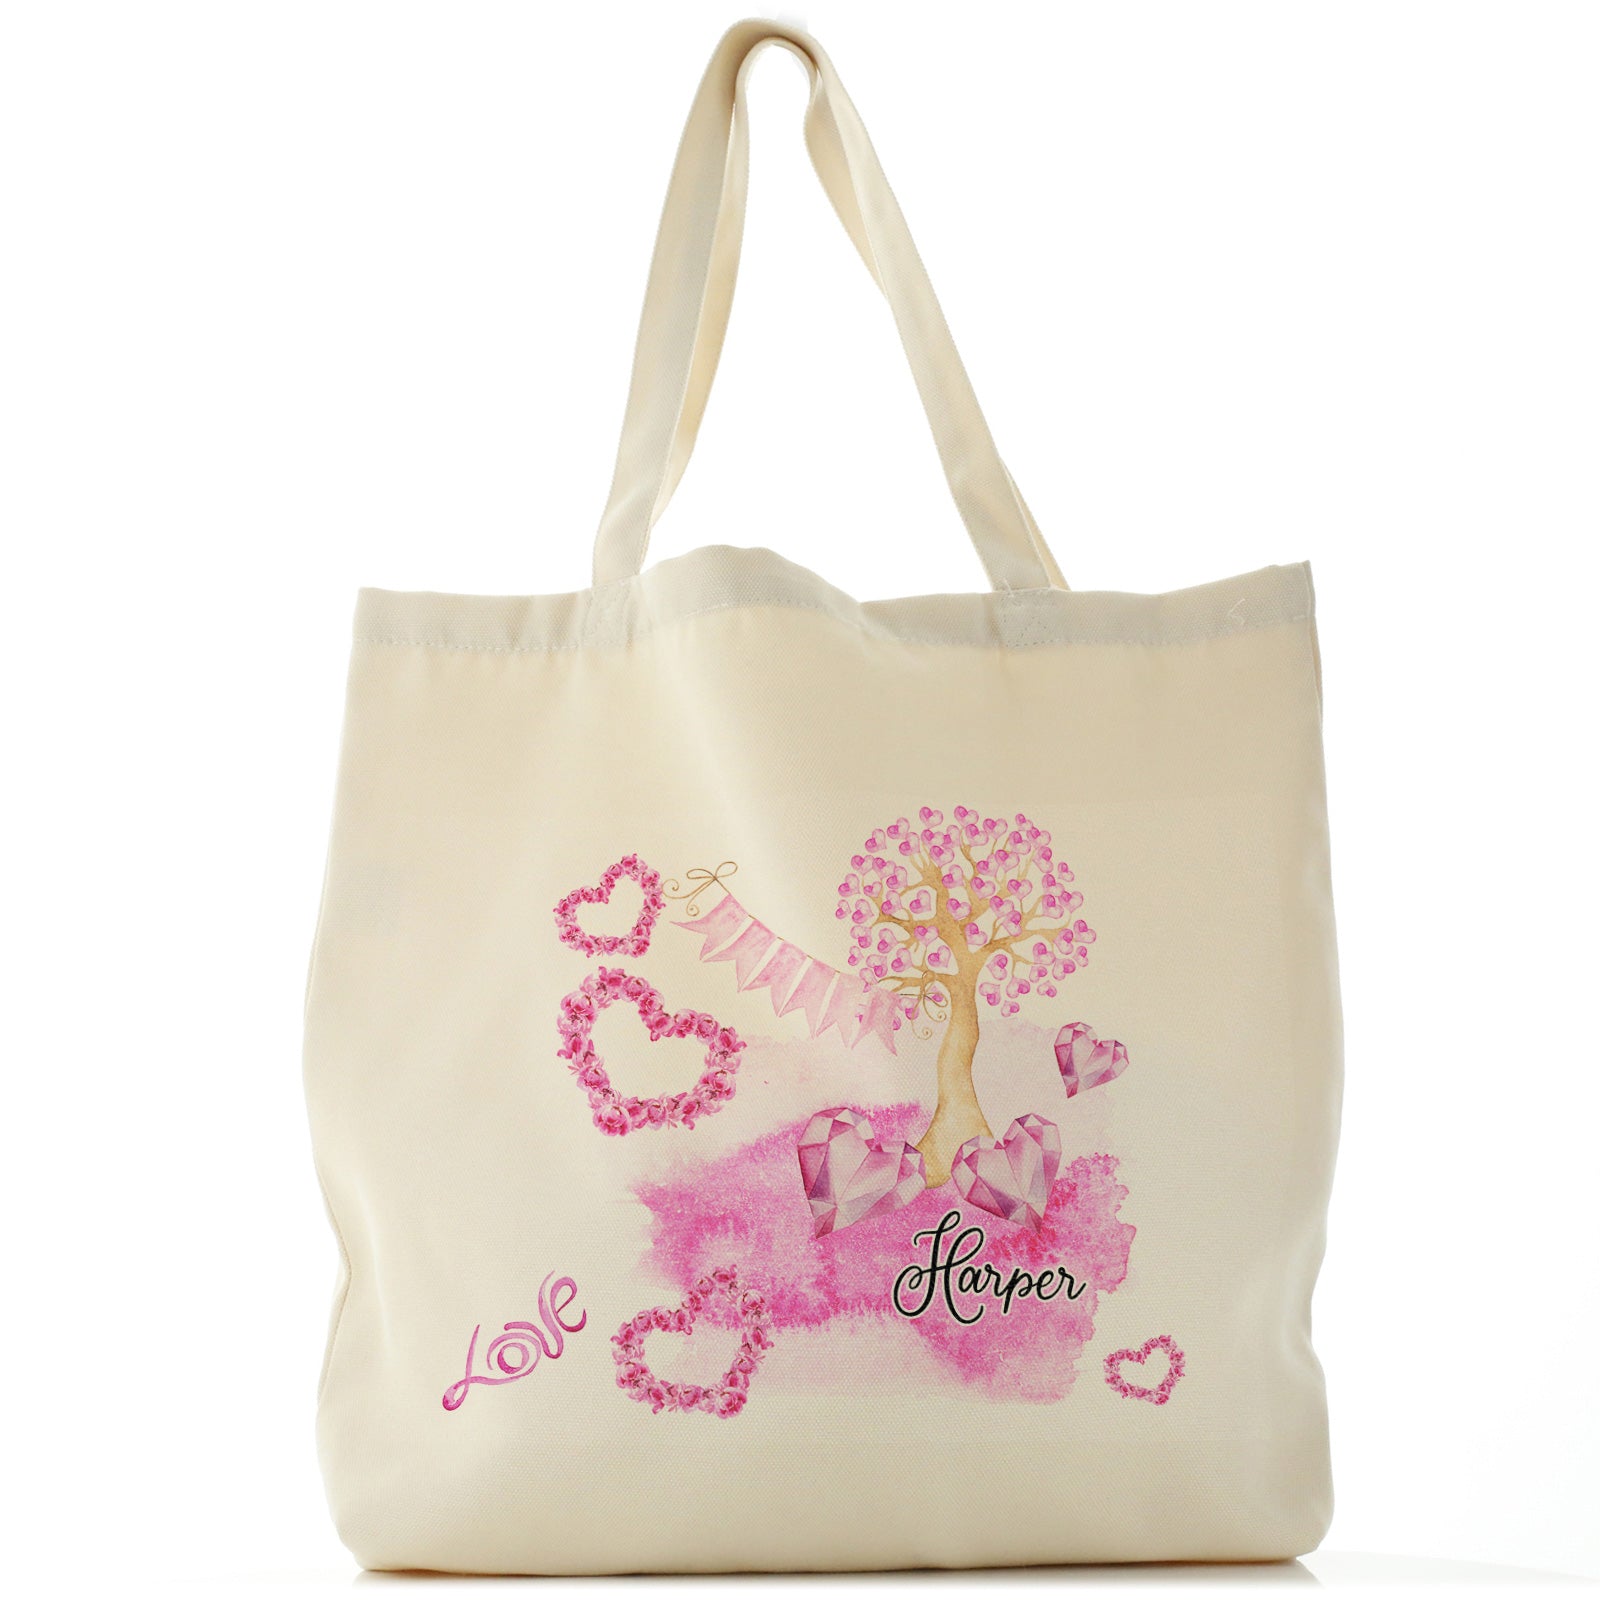 Personalised Tote Bag with Stylish Text and Pink Love Landscape Print